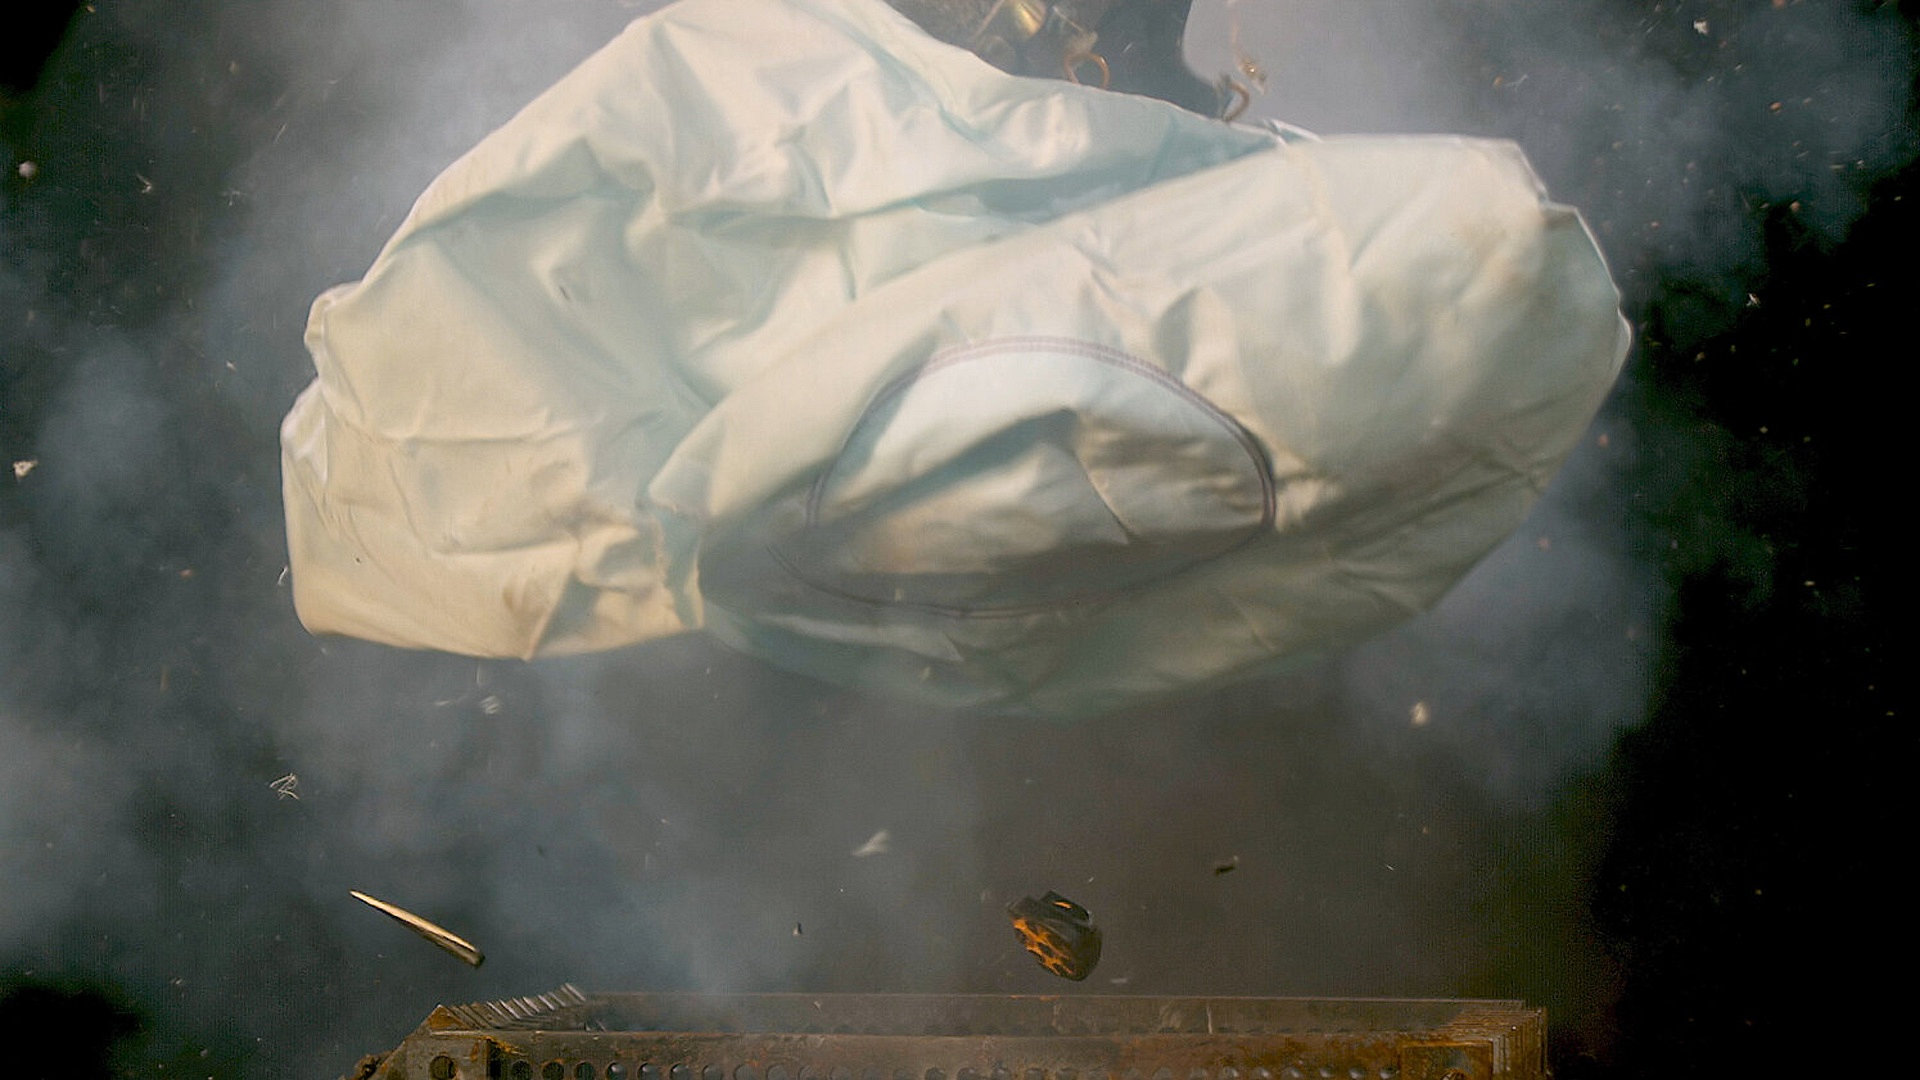 Ticking Time Bomb: The Truth Behind Takata Airbags